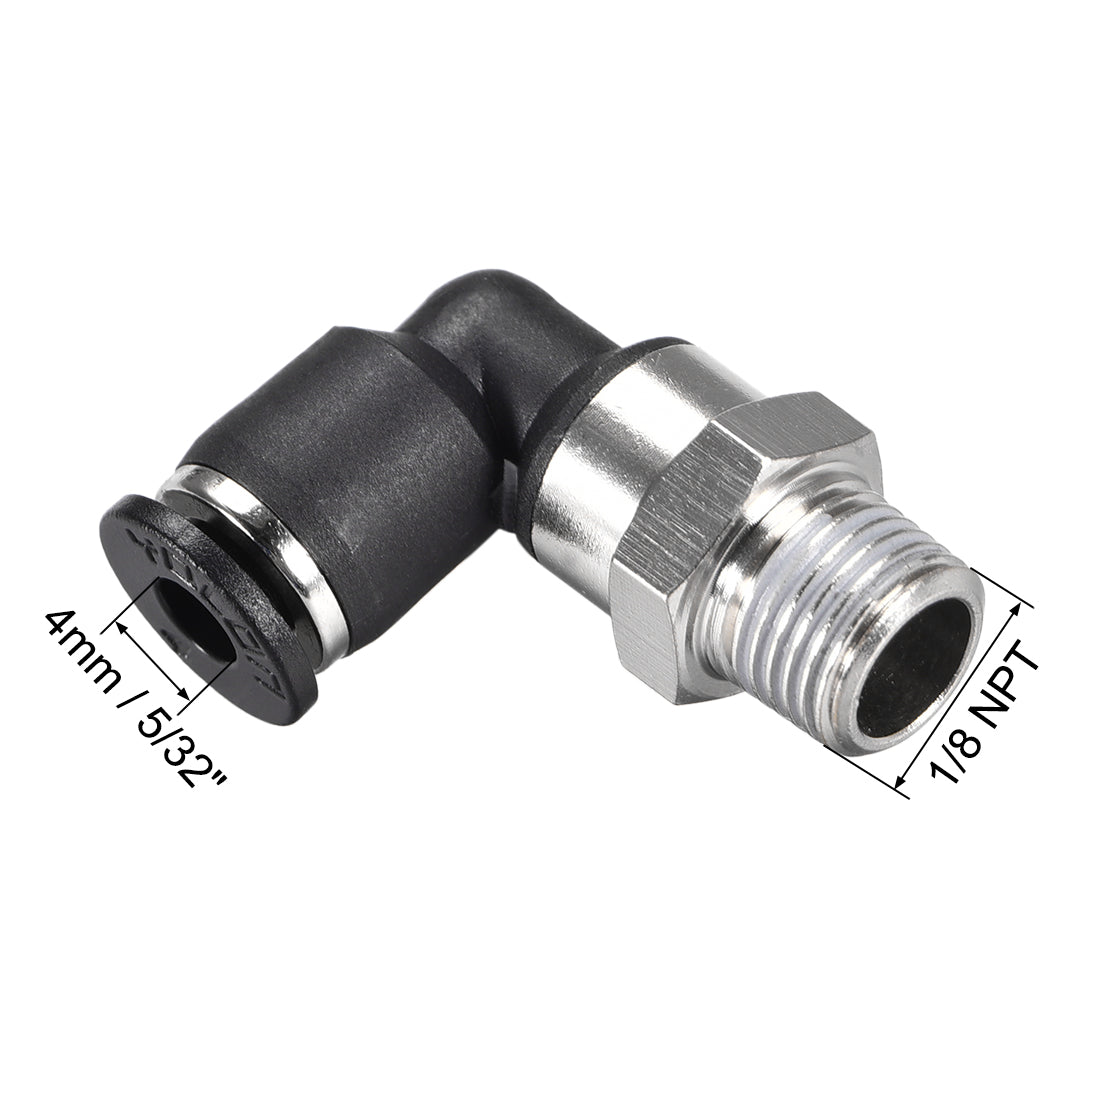 uxcell Uxcell Push to Connect Tube Fitting Male Elbow 4mm Tube OD x 1/8 NPT Thread Pneumatic Air Push Fit Lock Fitting 2pcs